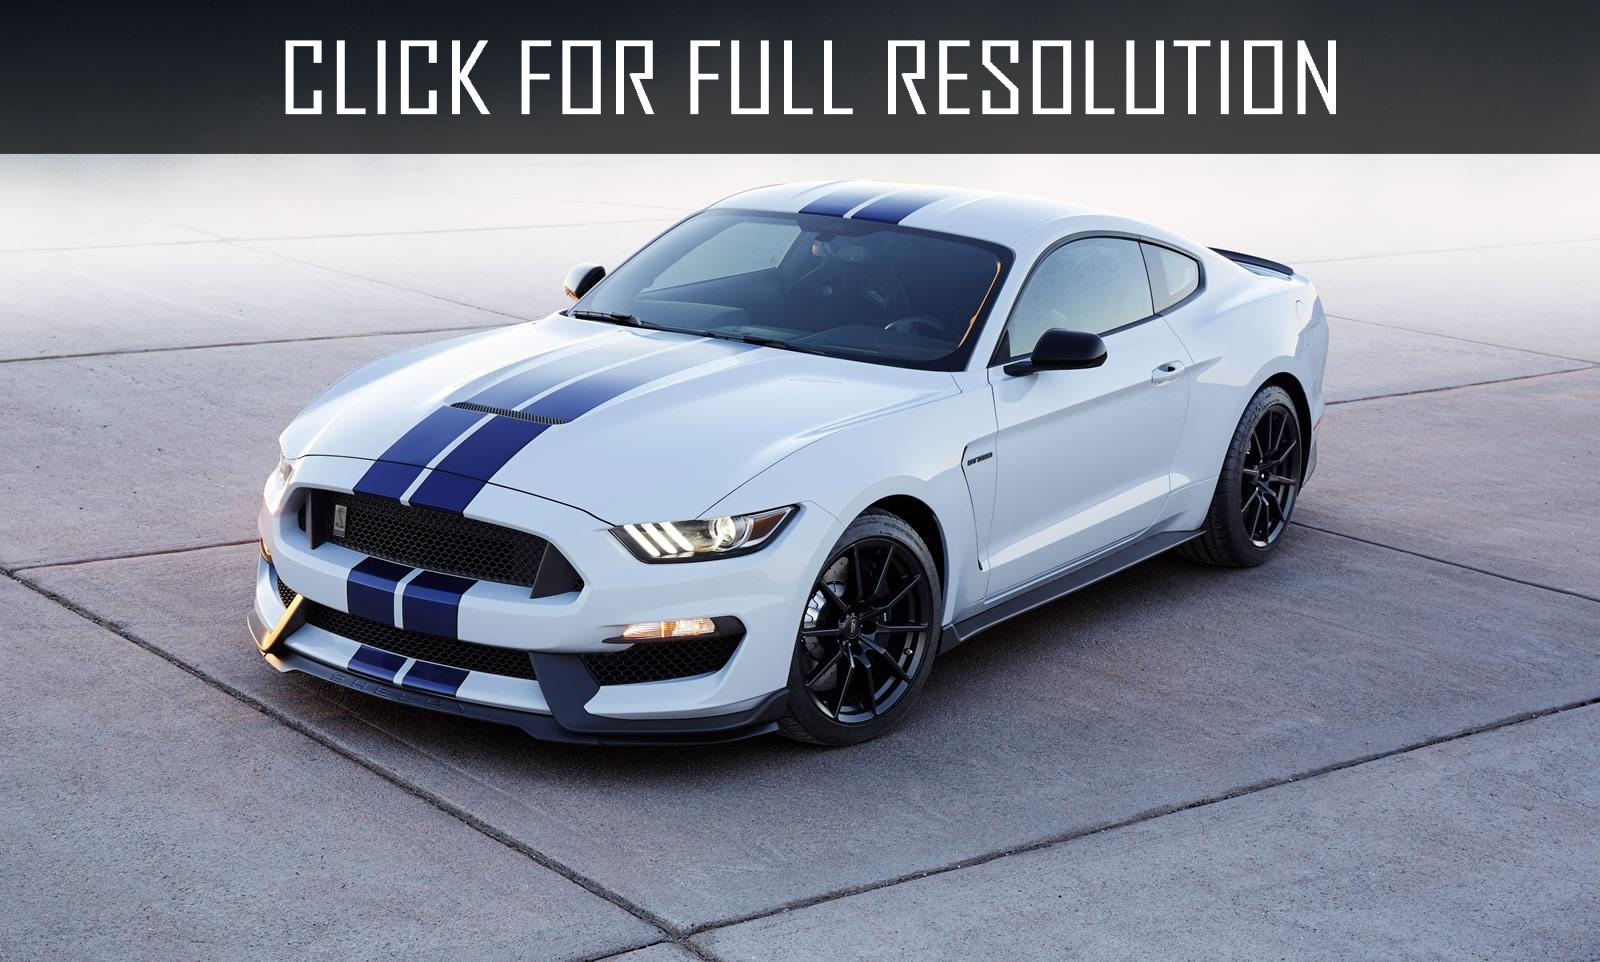 Ford mustang became the most popular sport coupe in 2015